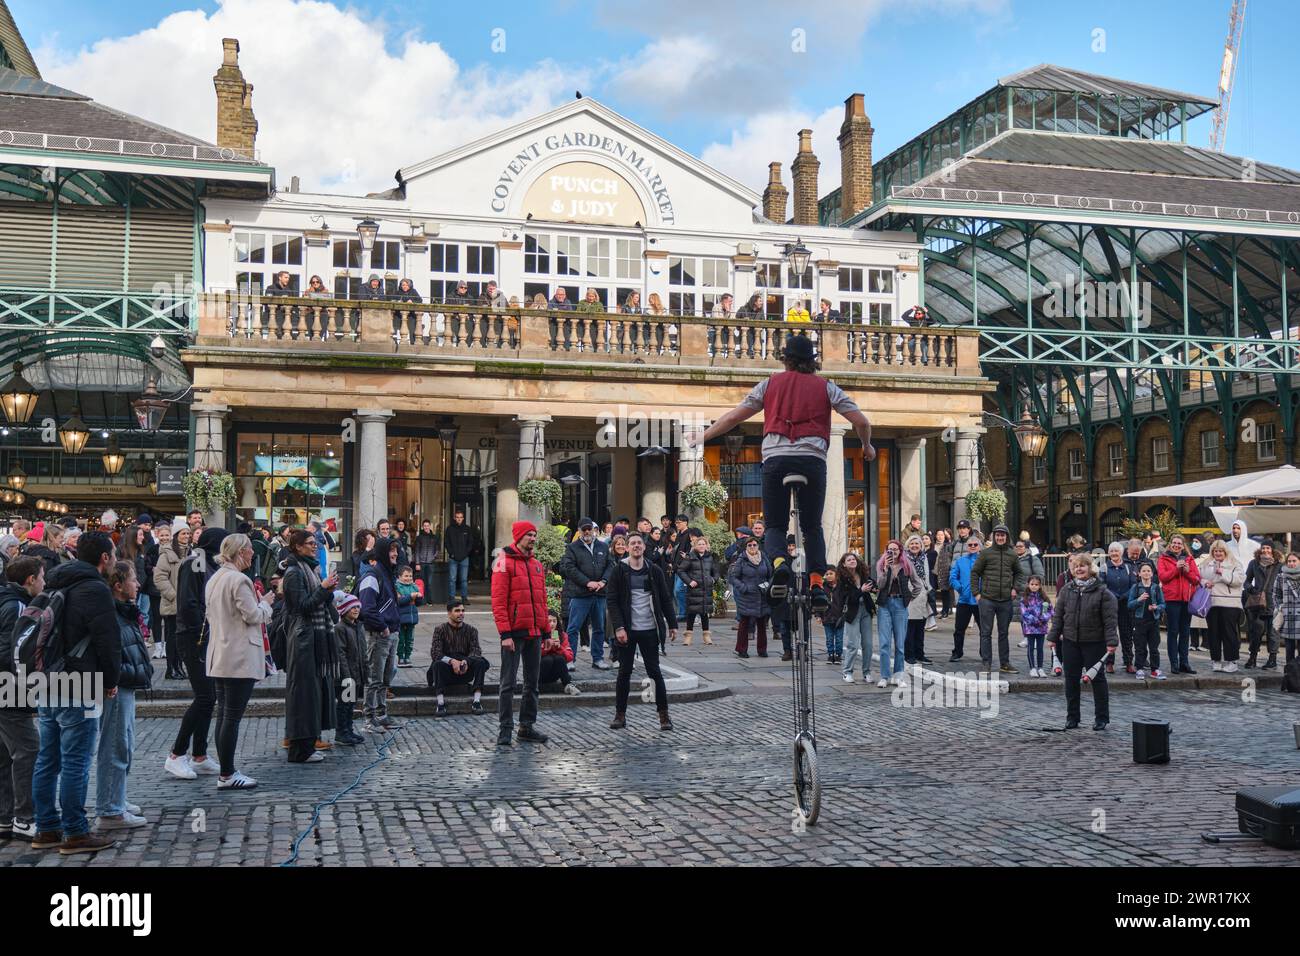 Street performer on a unicycle entertaining the public at Covent Garden Market, London, UK Stock Photo